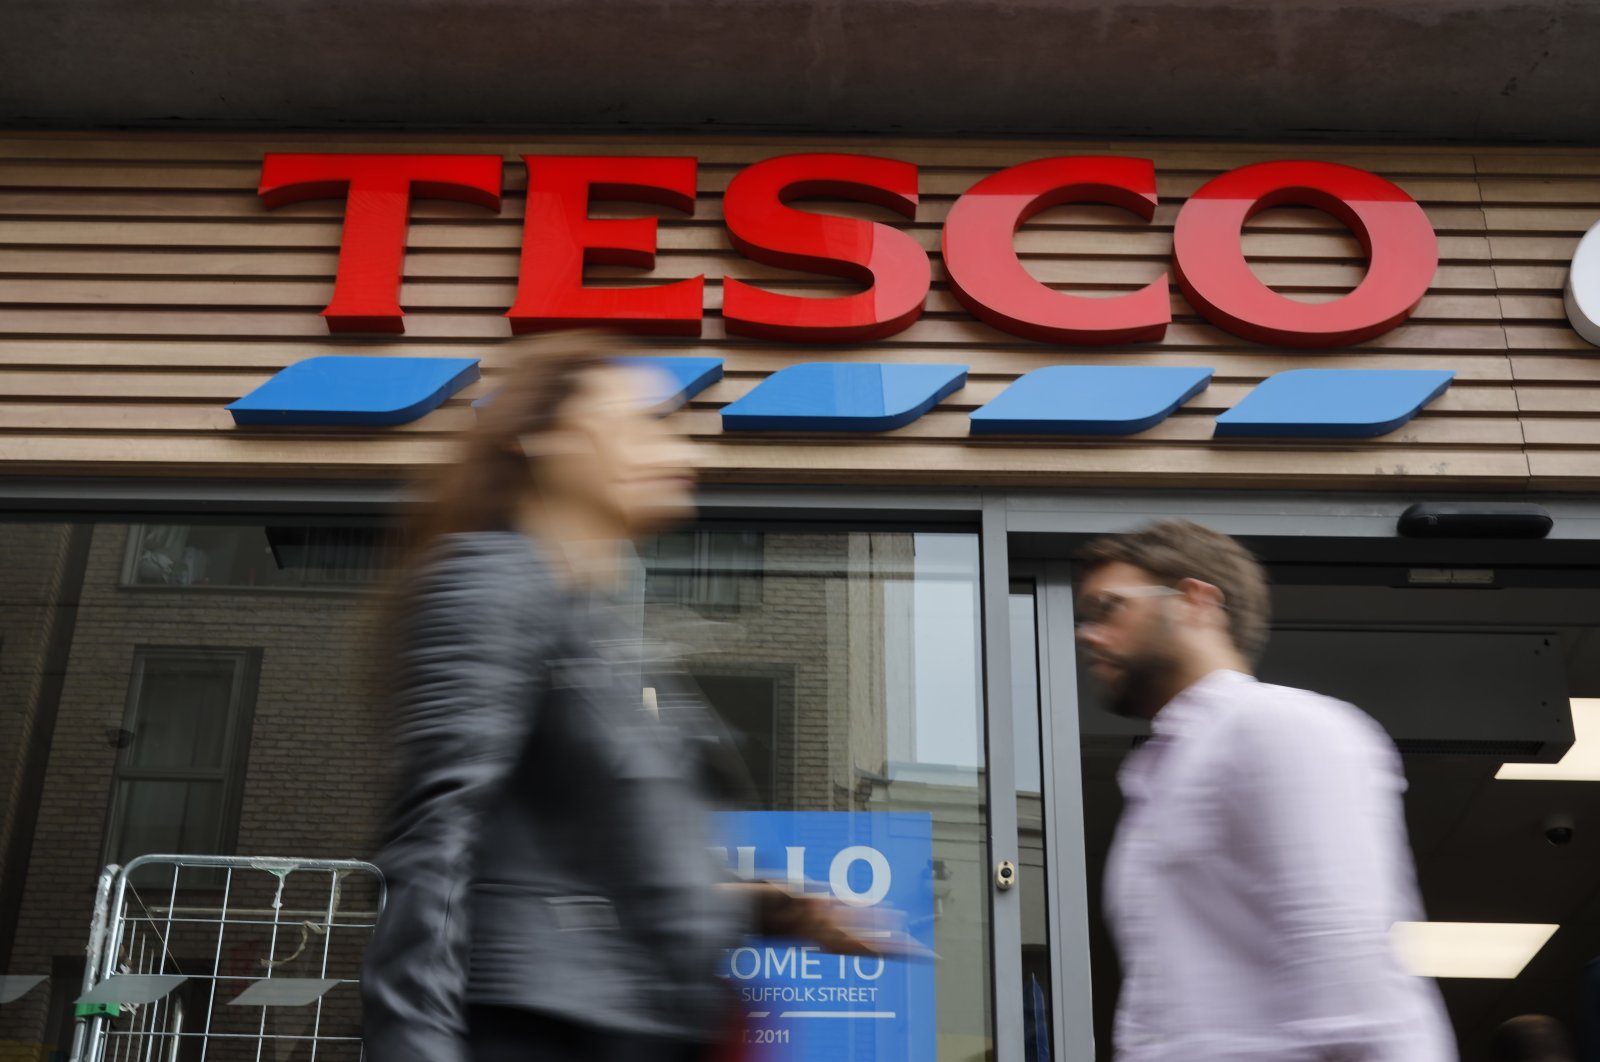 People walk past at a Tesco Express in central London, U.K., Sept. 30, 2019. (AFP Photo)